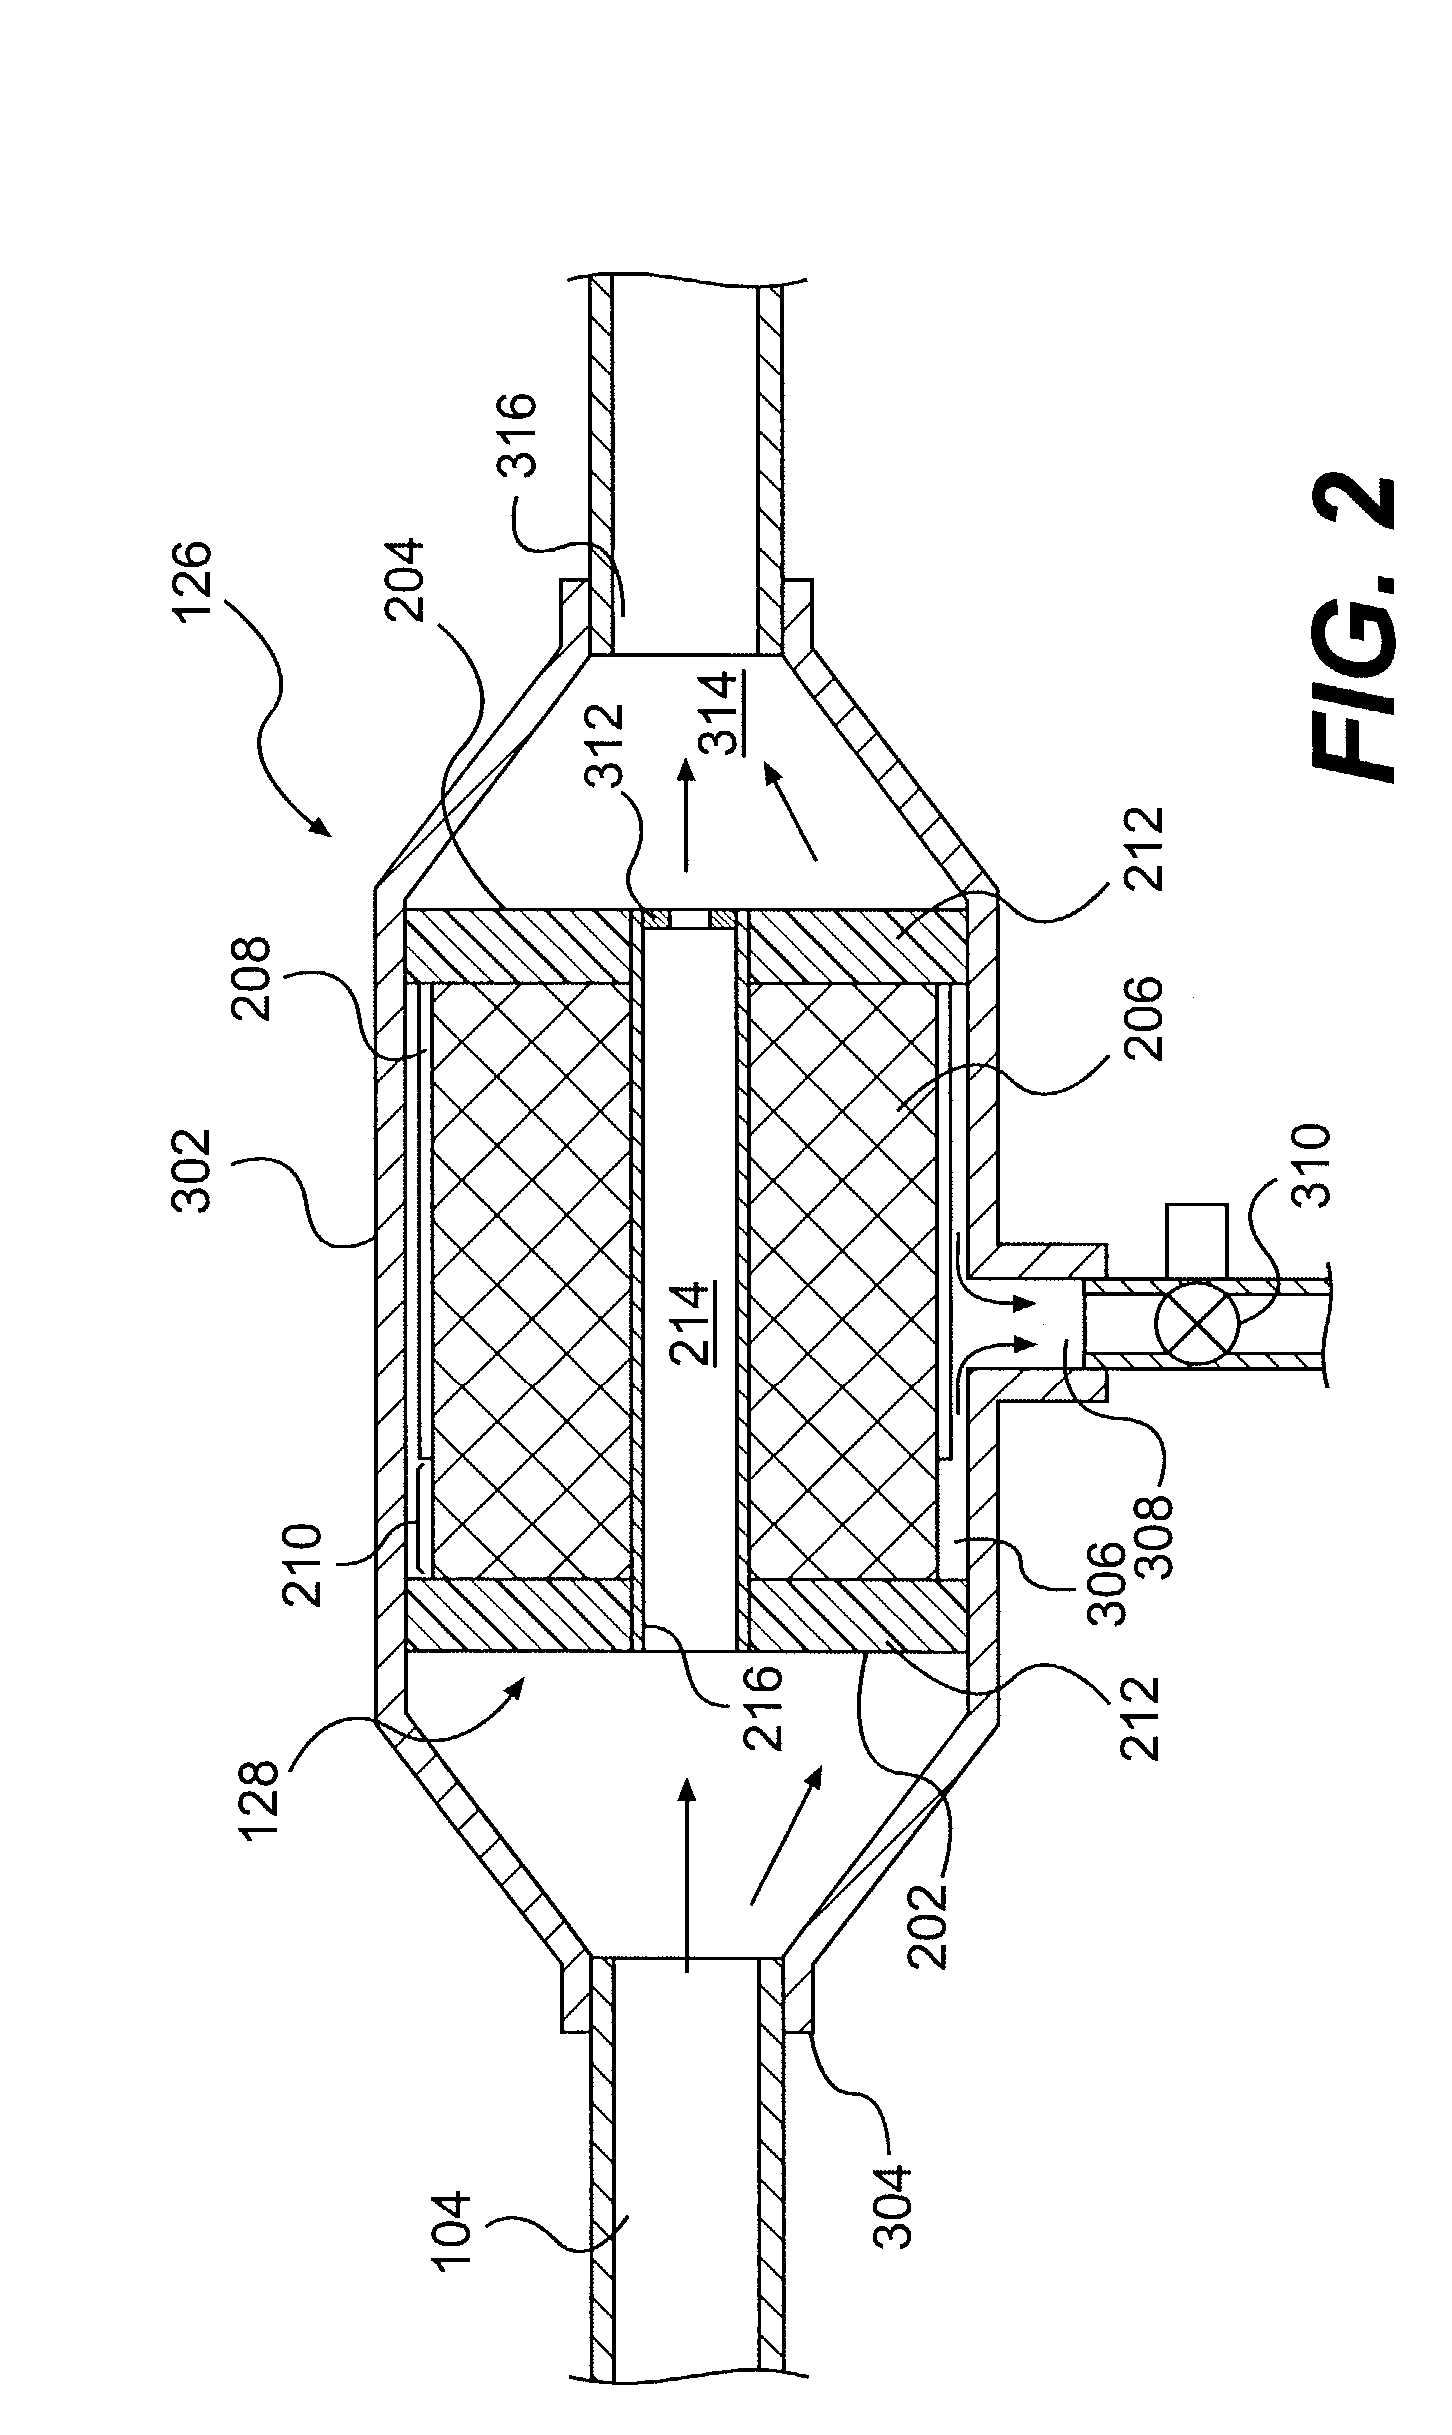 Separation membrane cartridge with bypass